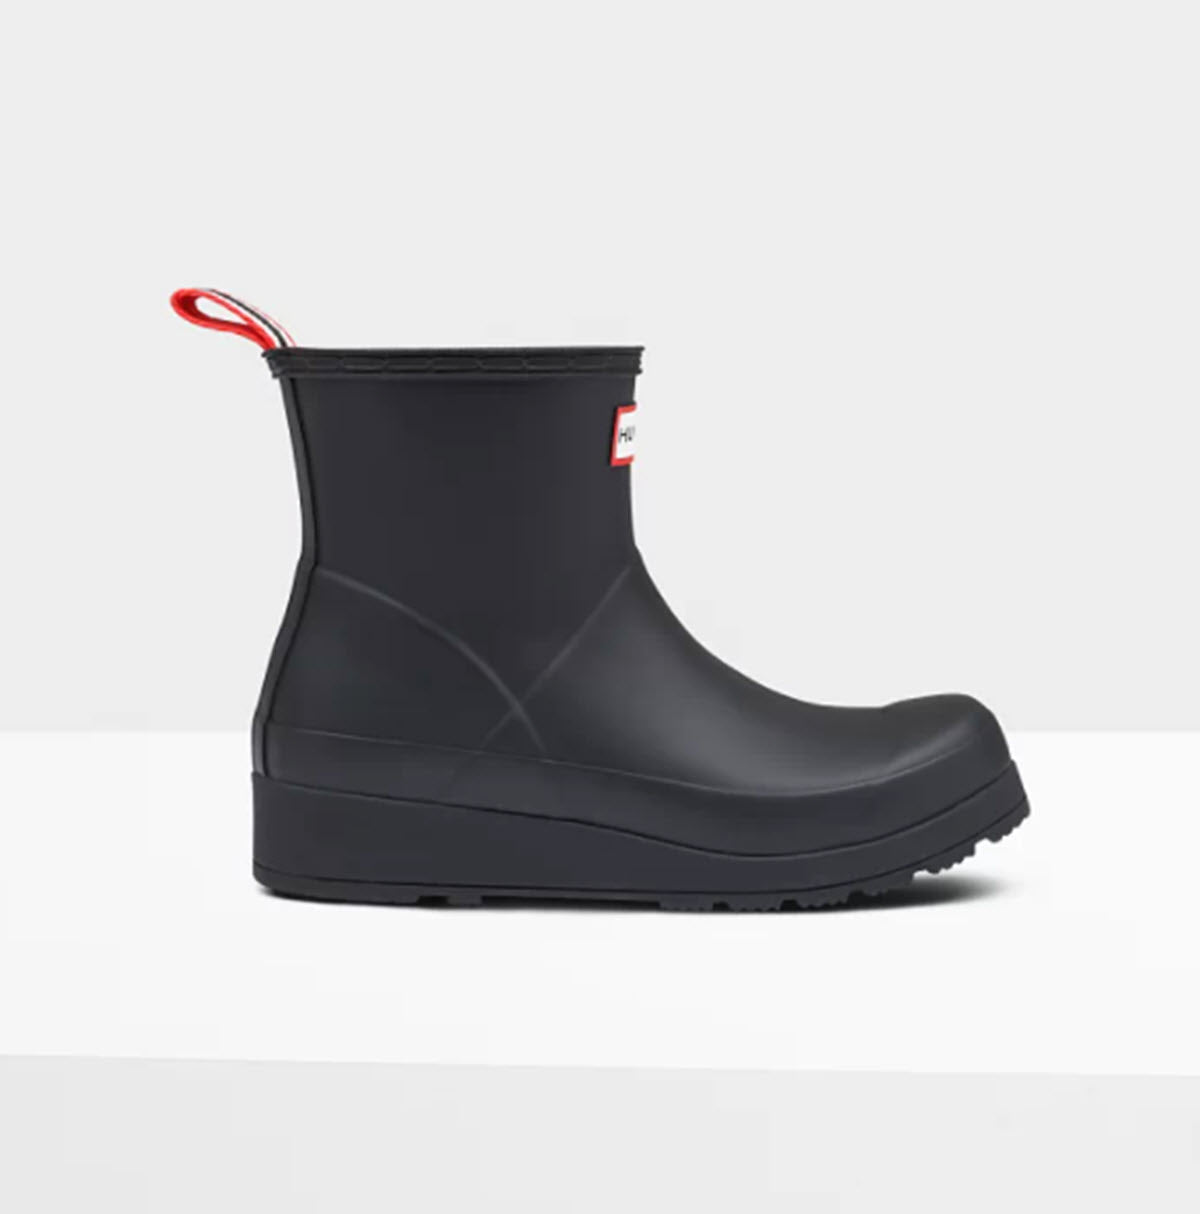 The Original Play Short Boot by Hunter in Black